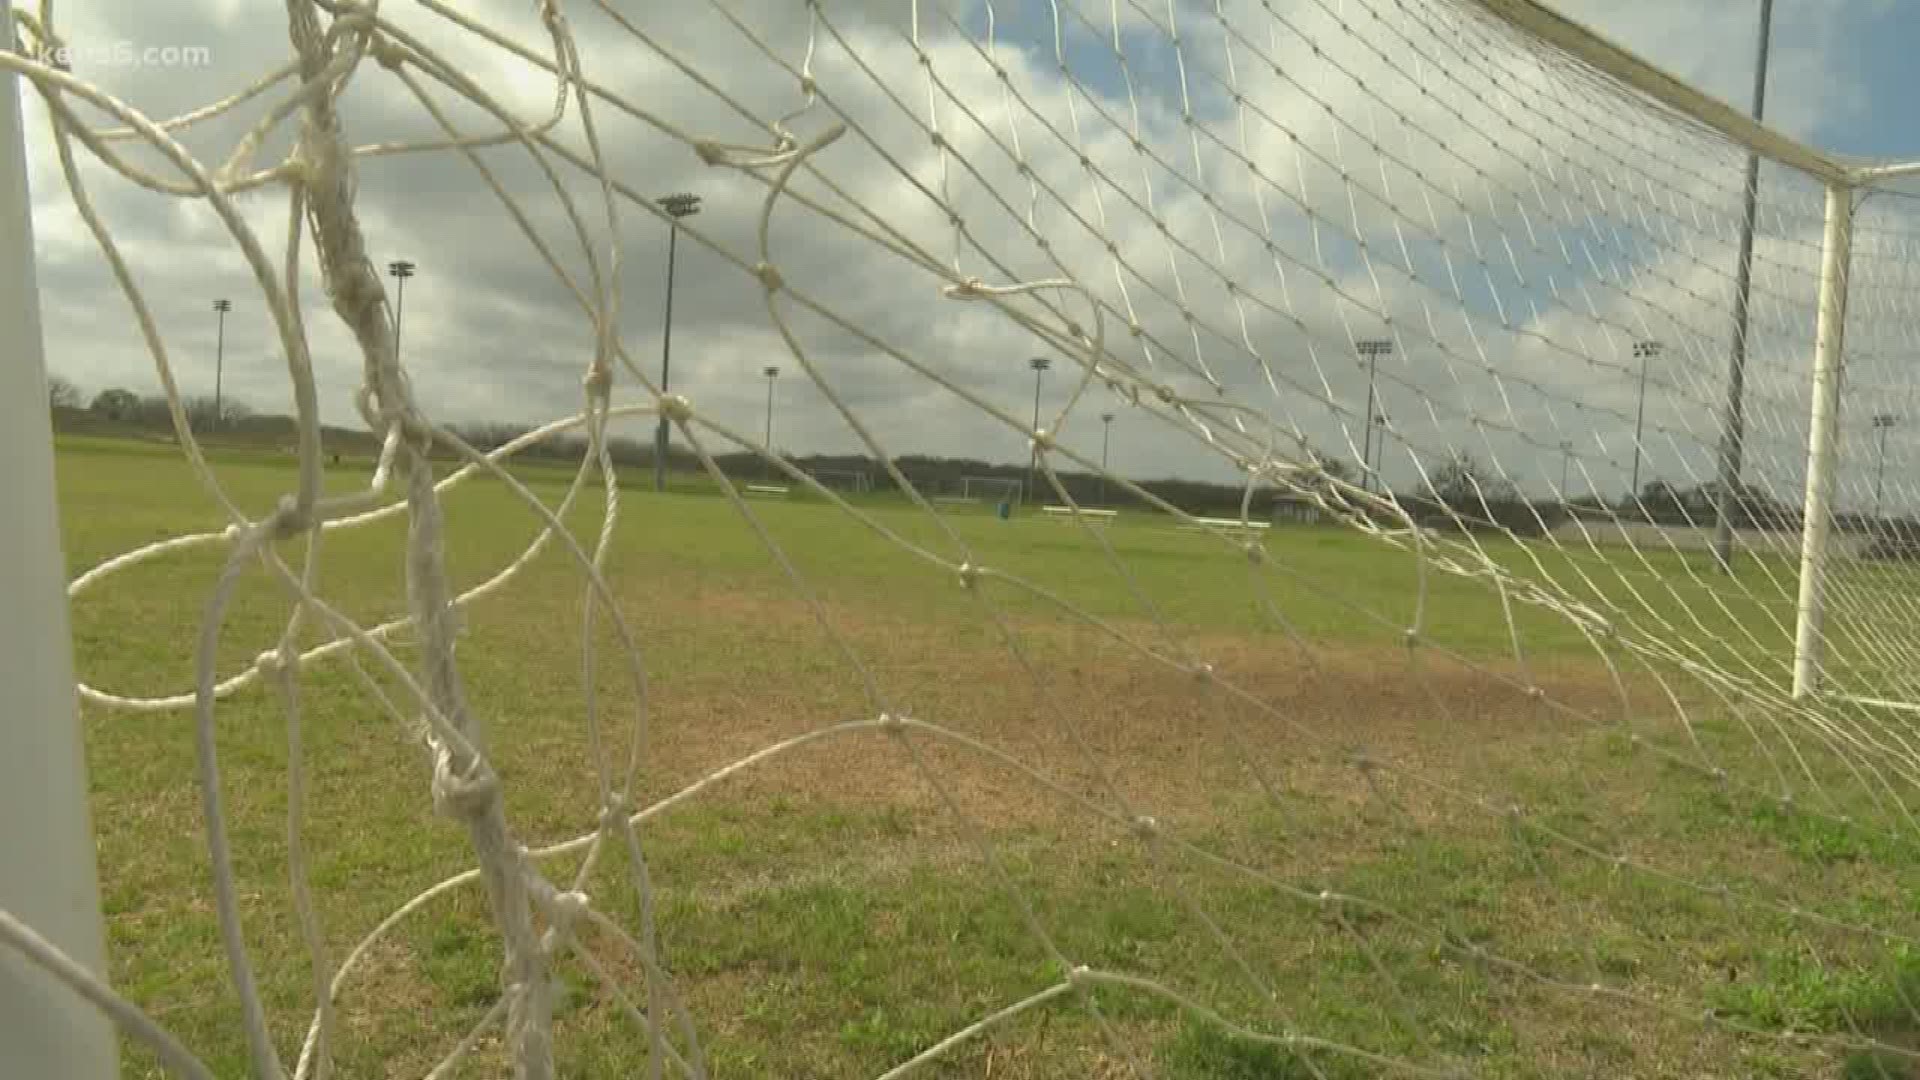 Horrible. Embarrassing. Scary. Those are the words used to describe a county-funded soccer complex on the south side. Eyewitness News reporter Sue Calberg went looking into what's being done to make sure everyone has a safe place to play.